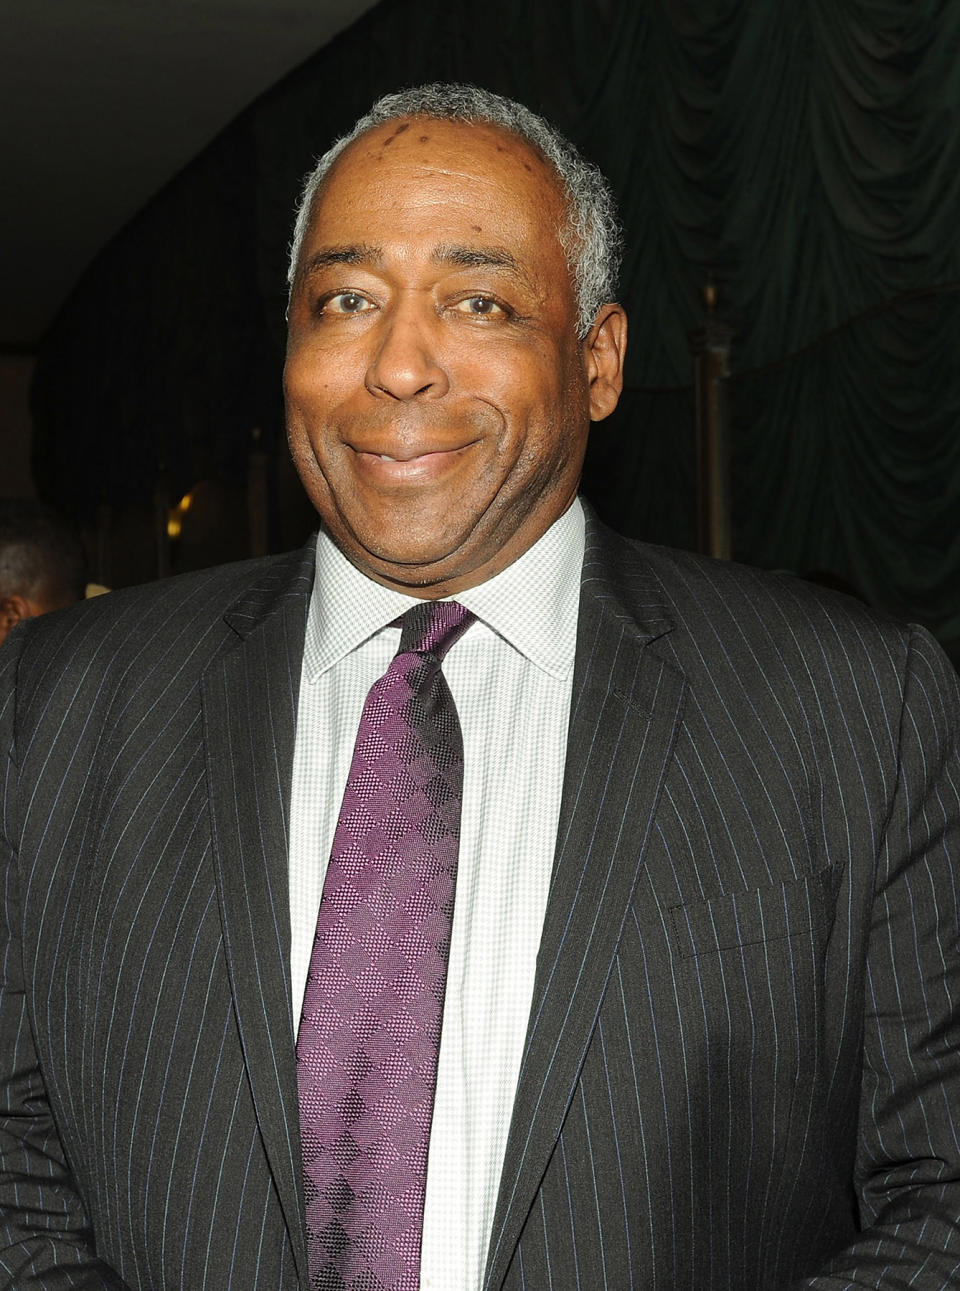 <p>John Saunders died August 10 at the age of 61. He was a prominent sports reporter and broadcaster. — (Pictured) John Saunders attends the 2016 New Jersey Hall Of Fame Induction Ceremony at Asbury Park Convention Center in 2016 in Asbury Park, New Jersey. (Bobby Bank/WireImage) </p>